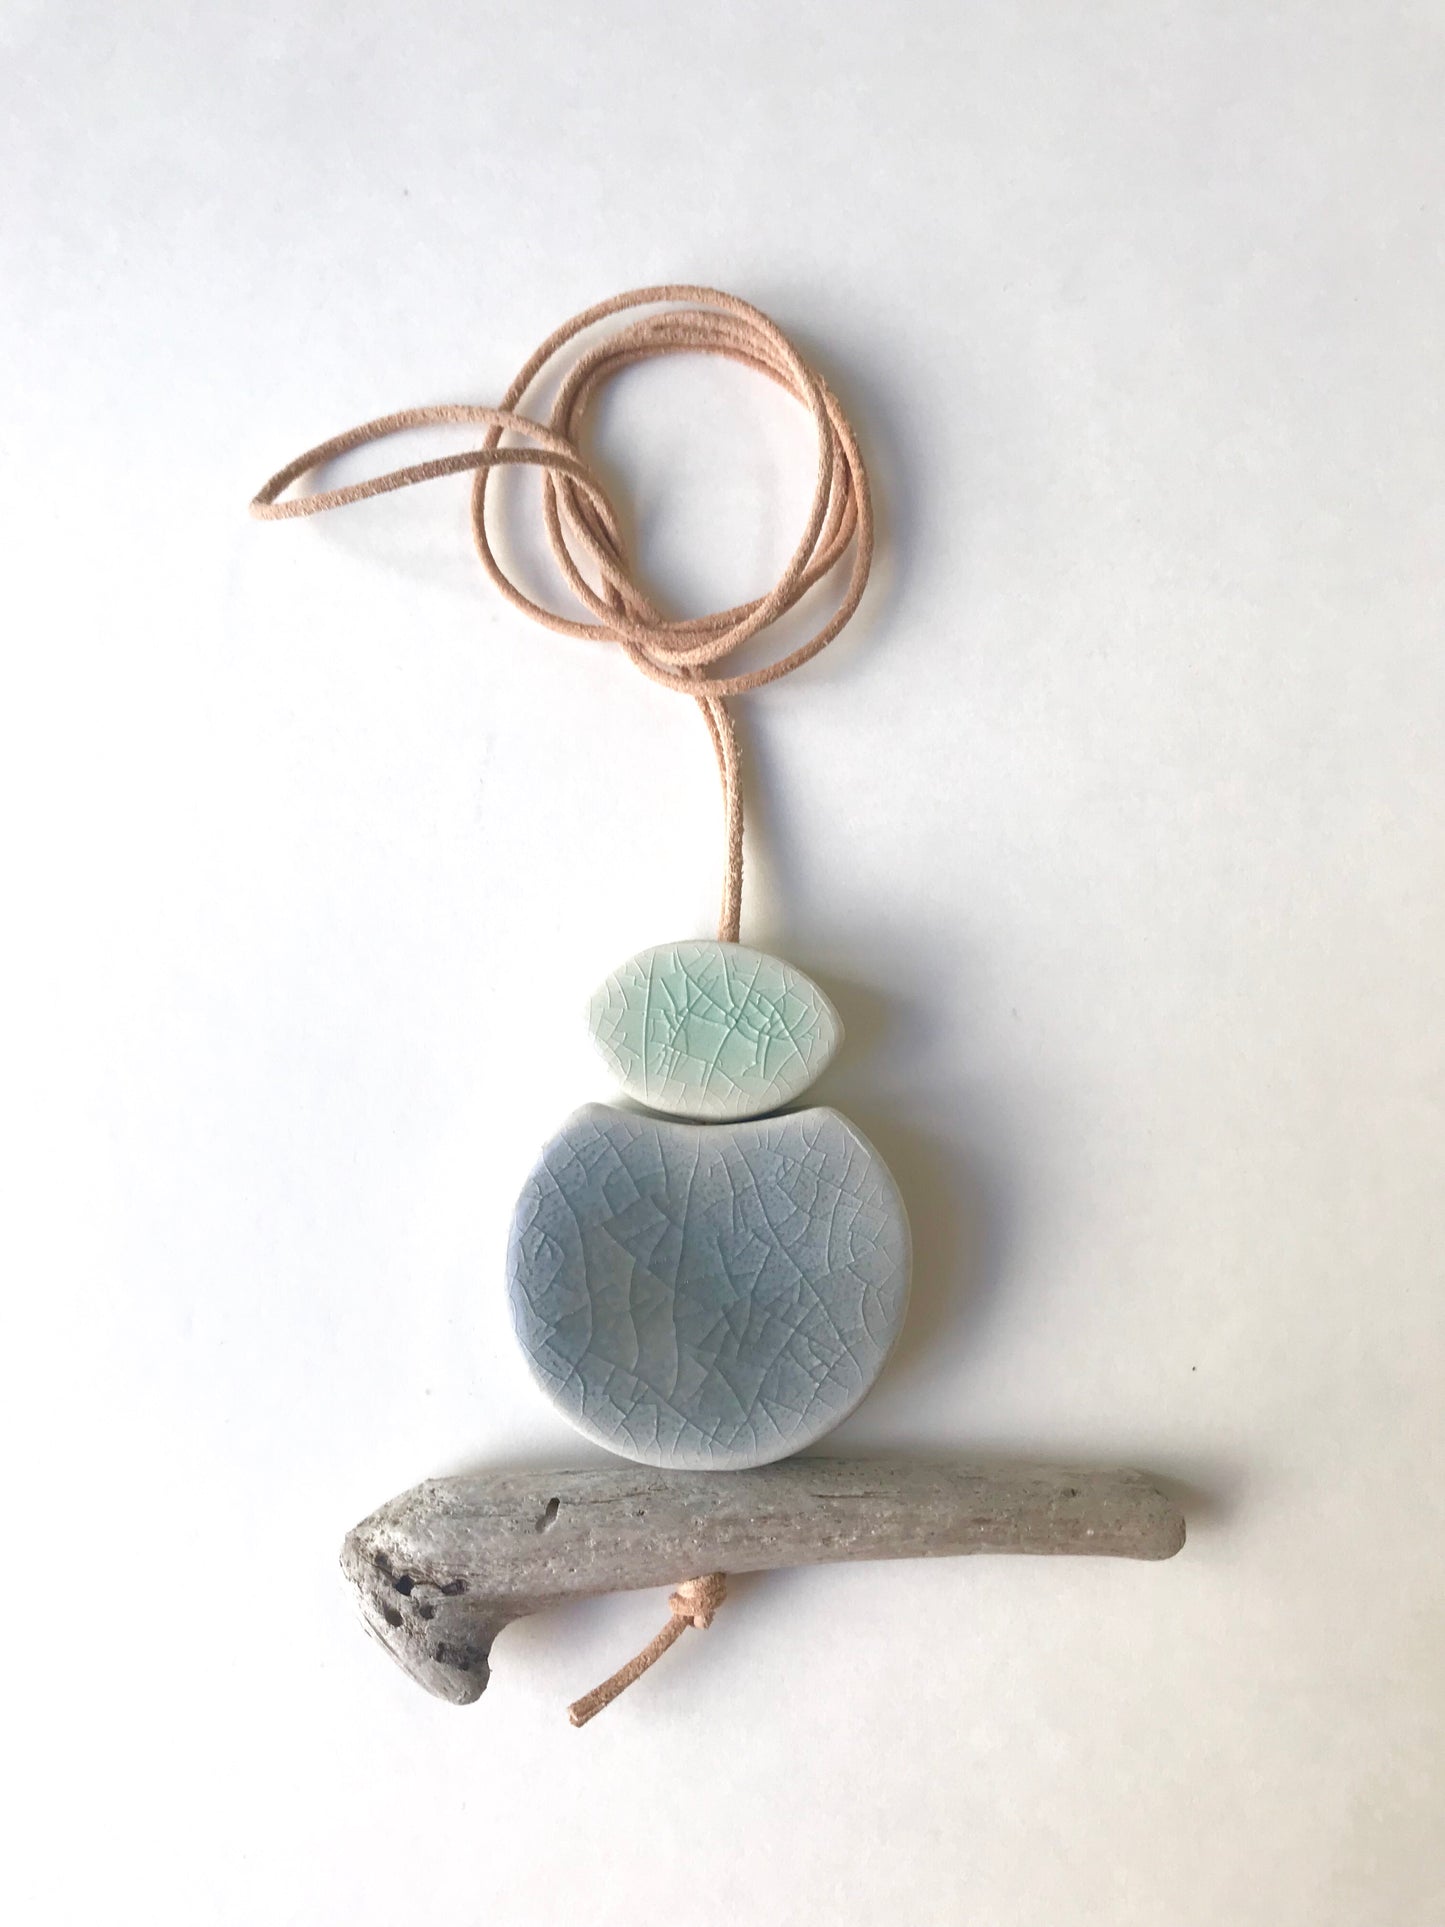 sold - 'infinite & ideal' moon meets ocean, one of a kind wearable piece